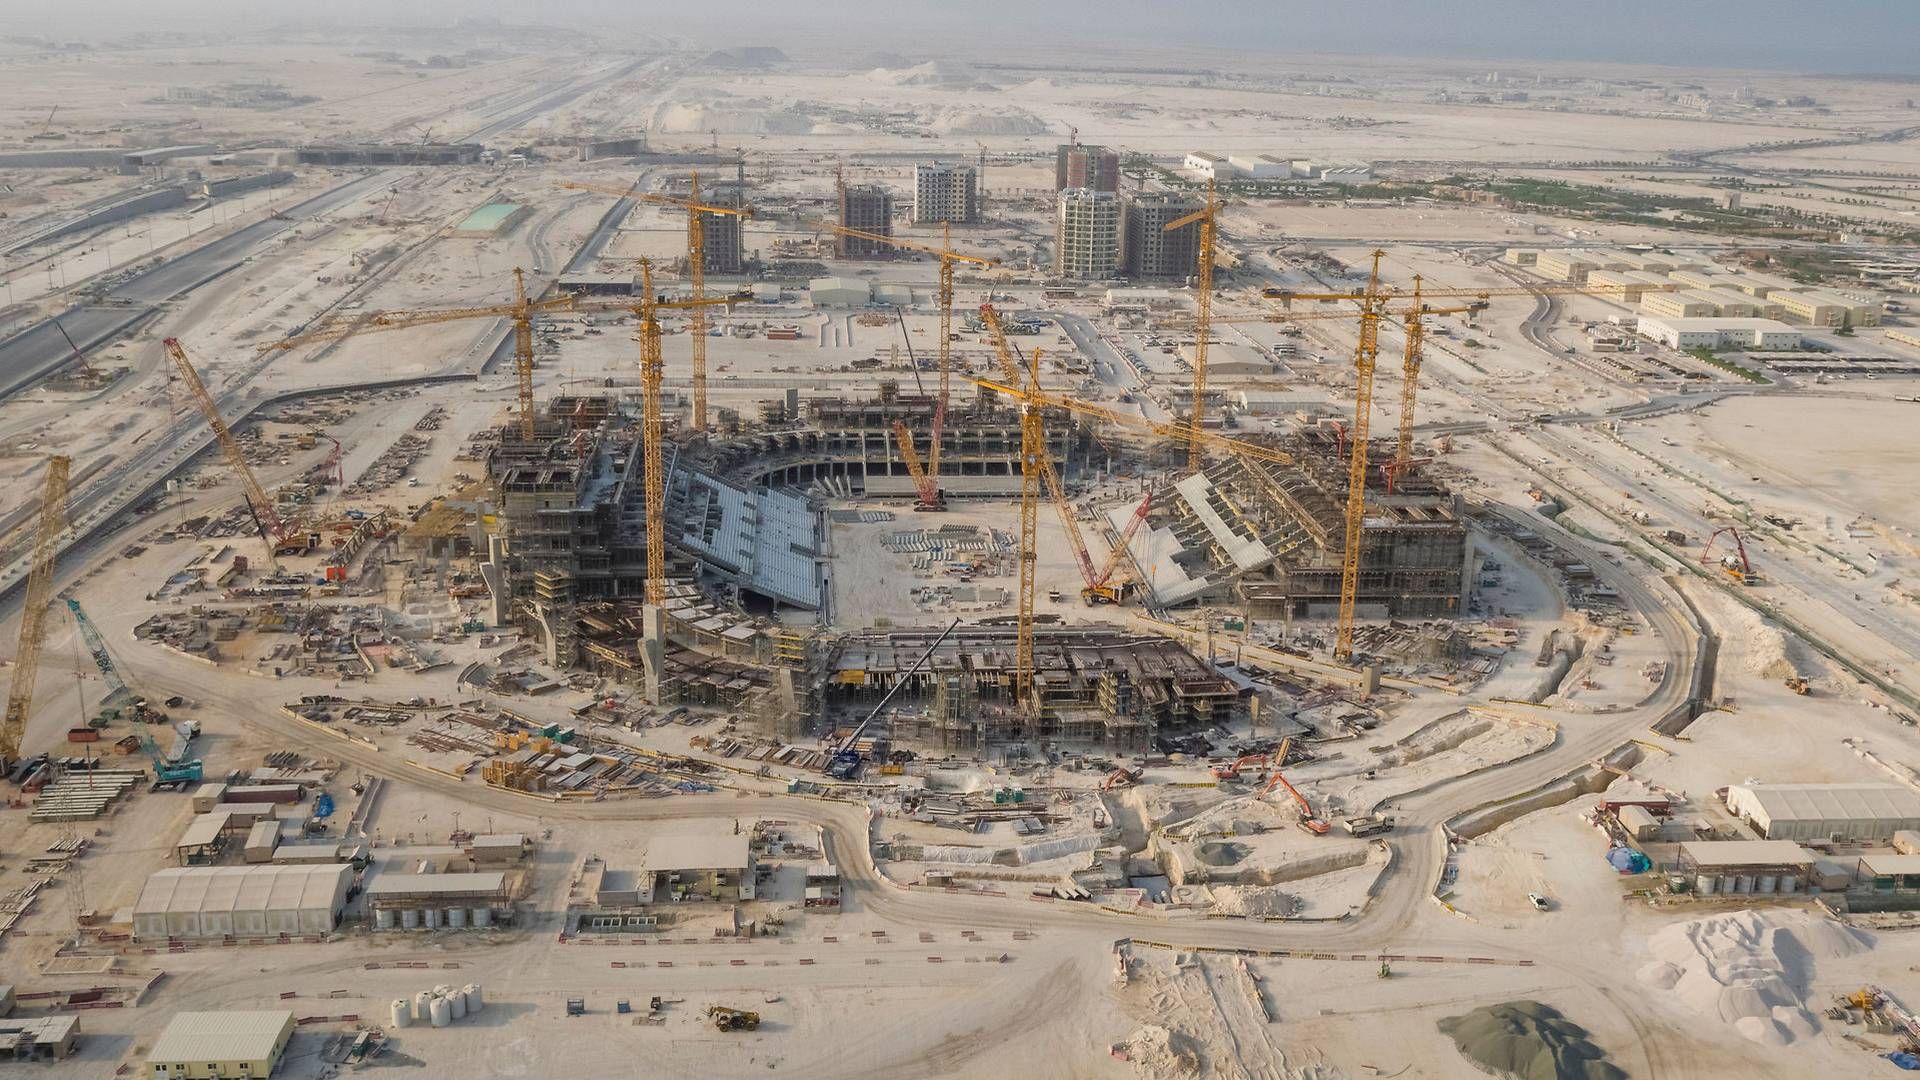 Qatar has been heavily criticized by both sporting and human rights associations over the working conditions at the world cup stadium construction site. | Photo: Handout/Reuters/Ritzau Scanpix